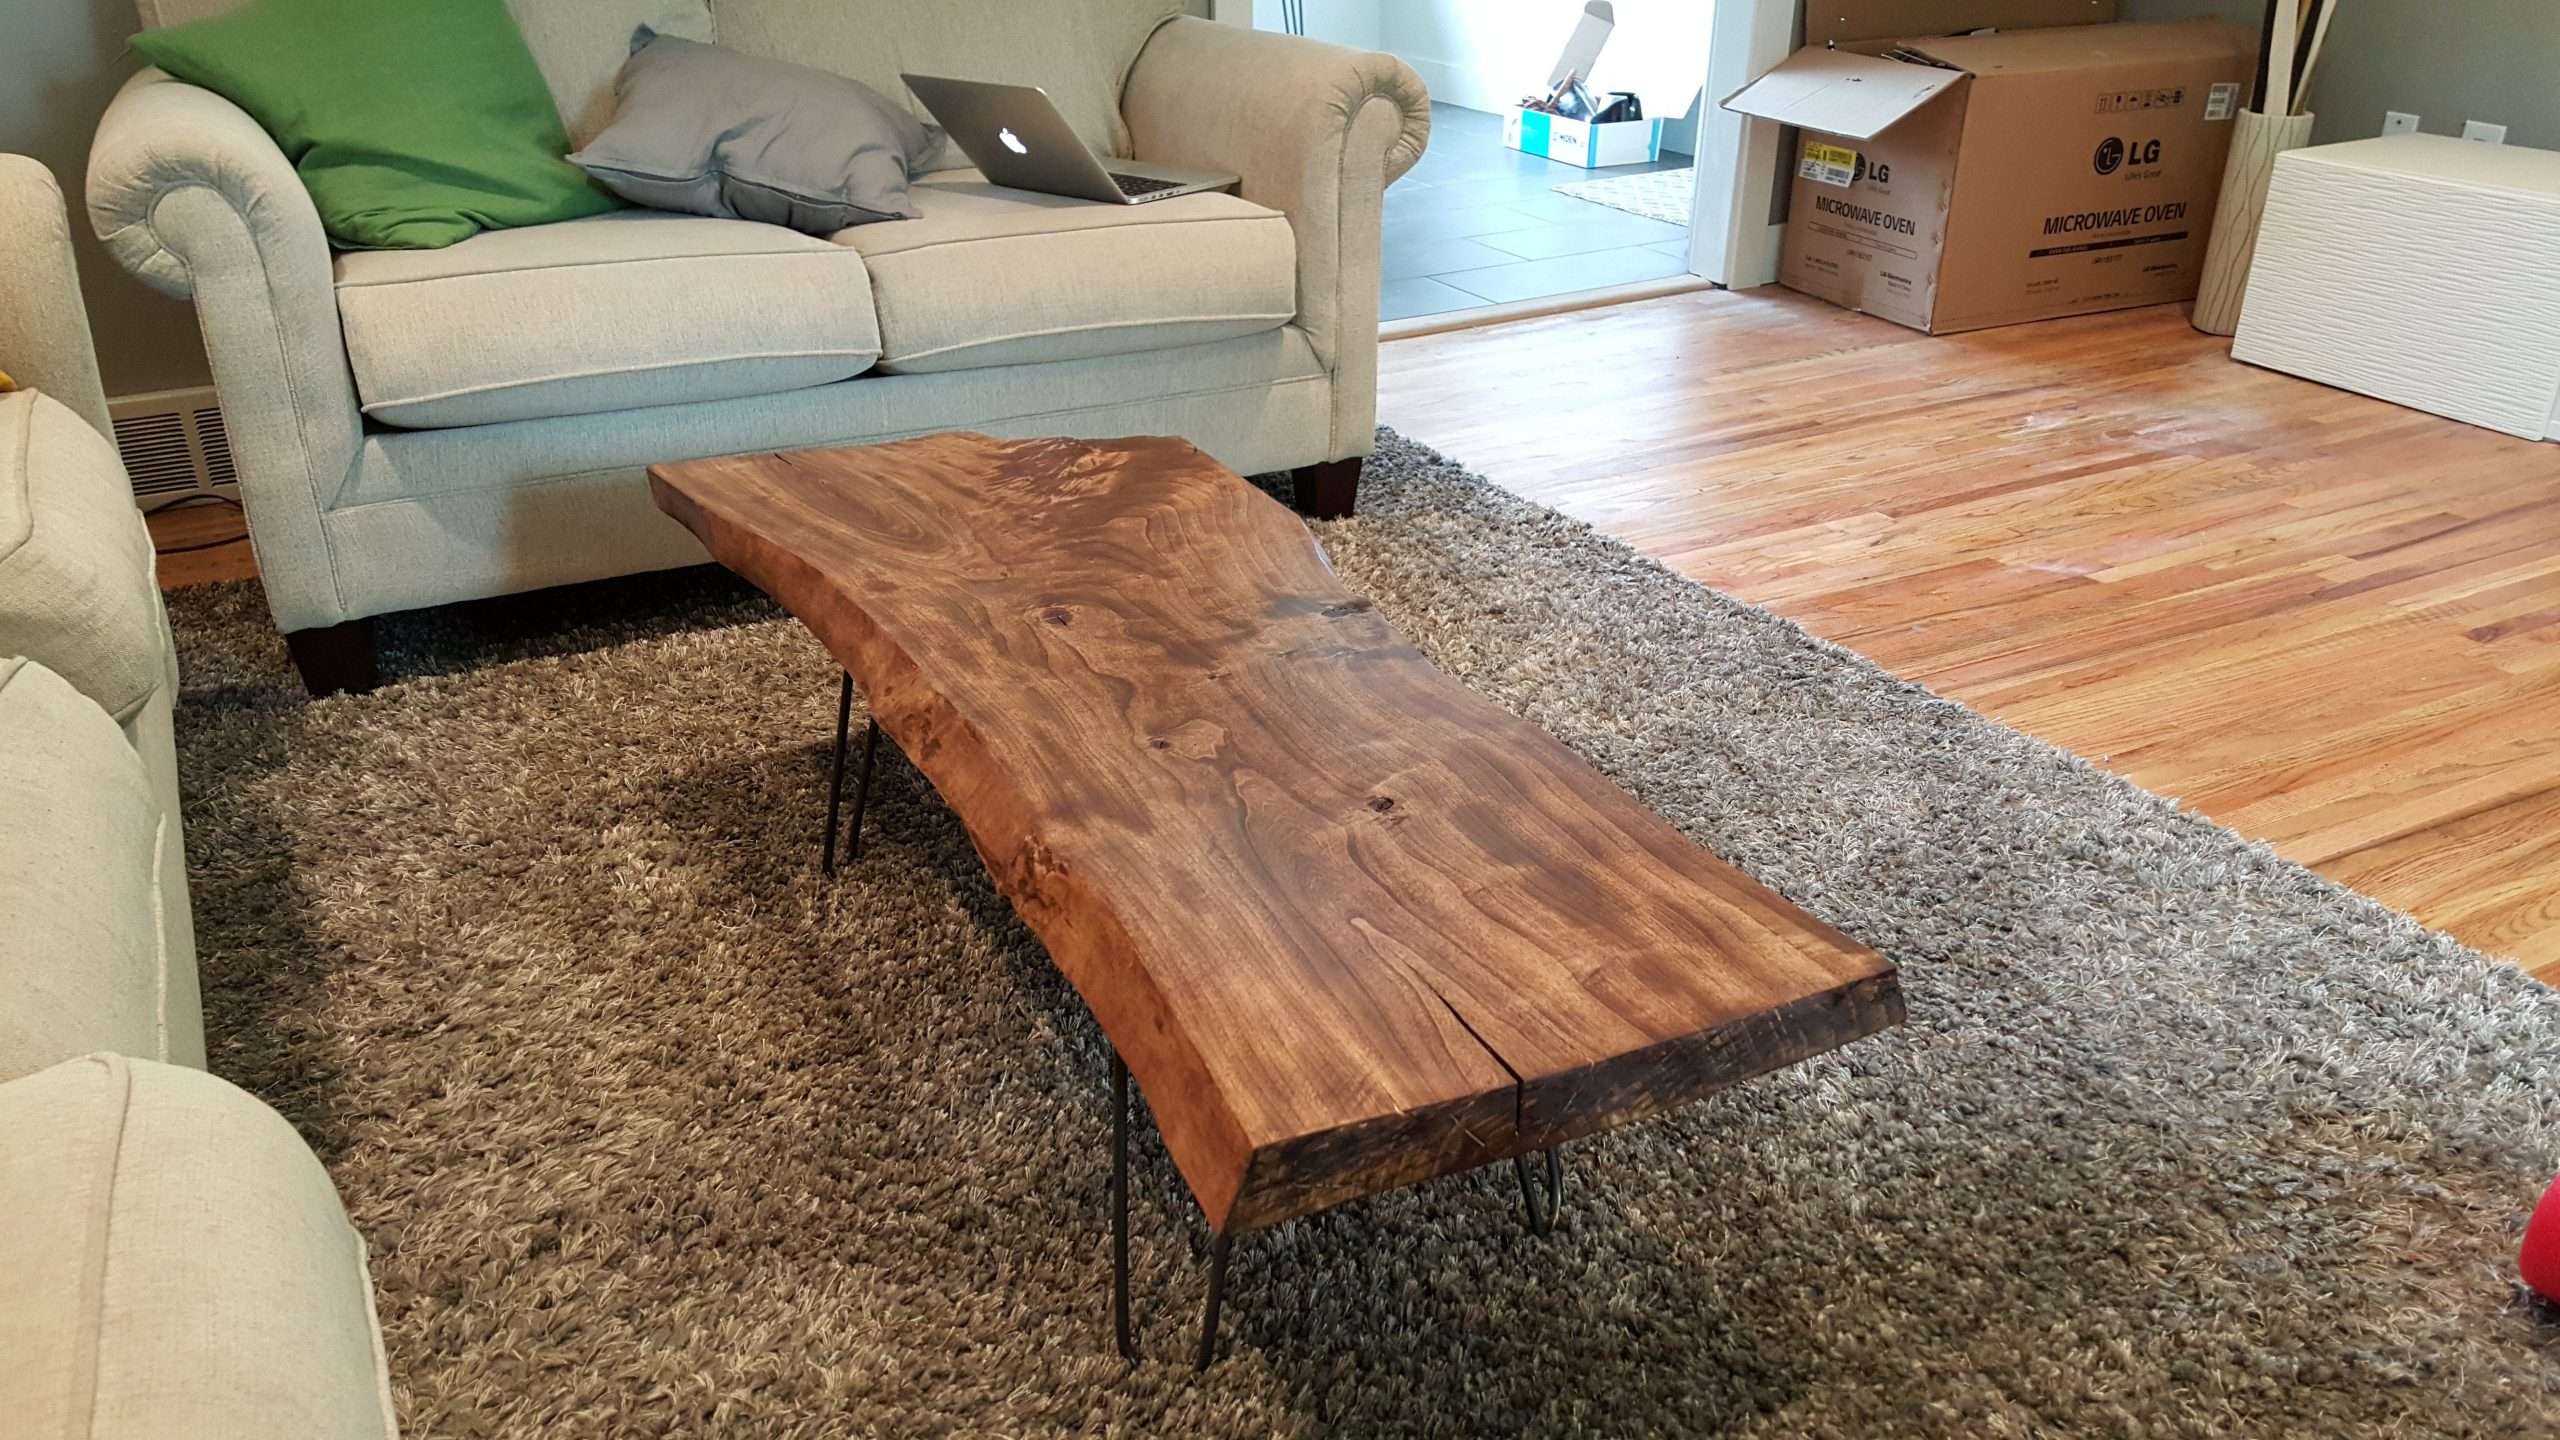 Live Edge Wood Coffee Table. First Post! : DIY